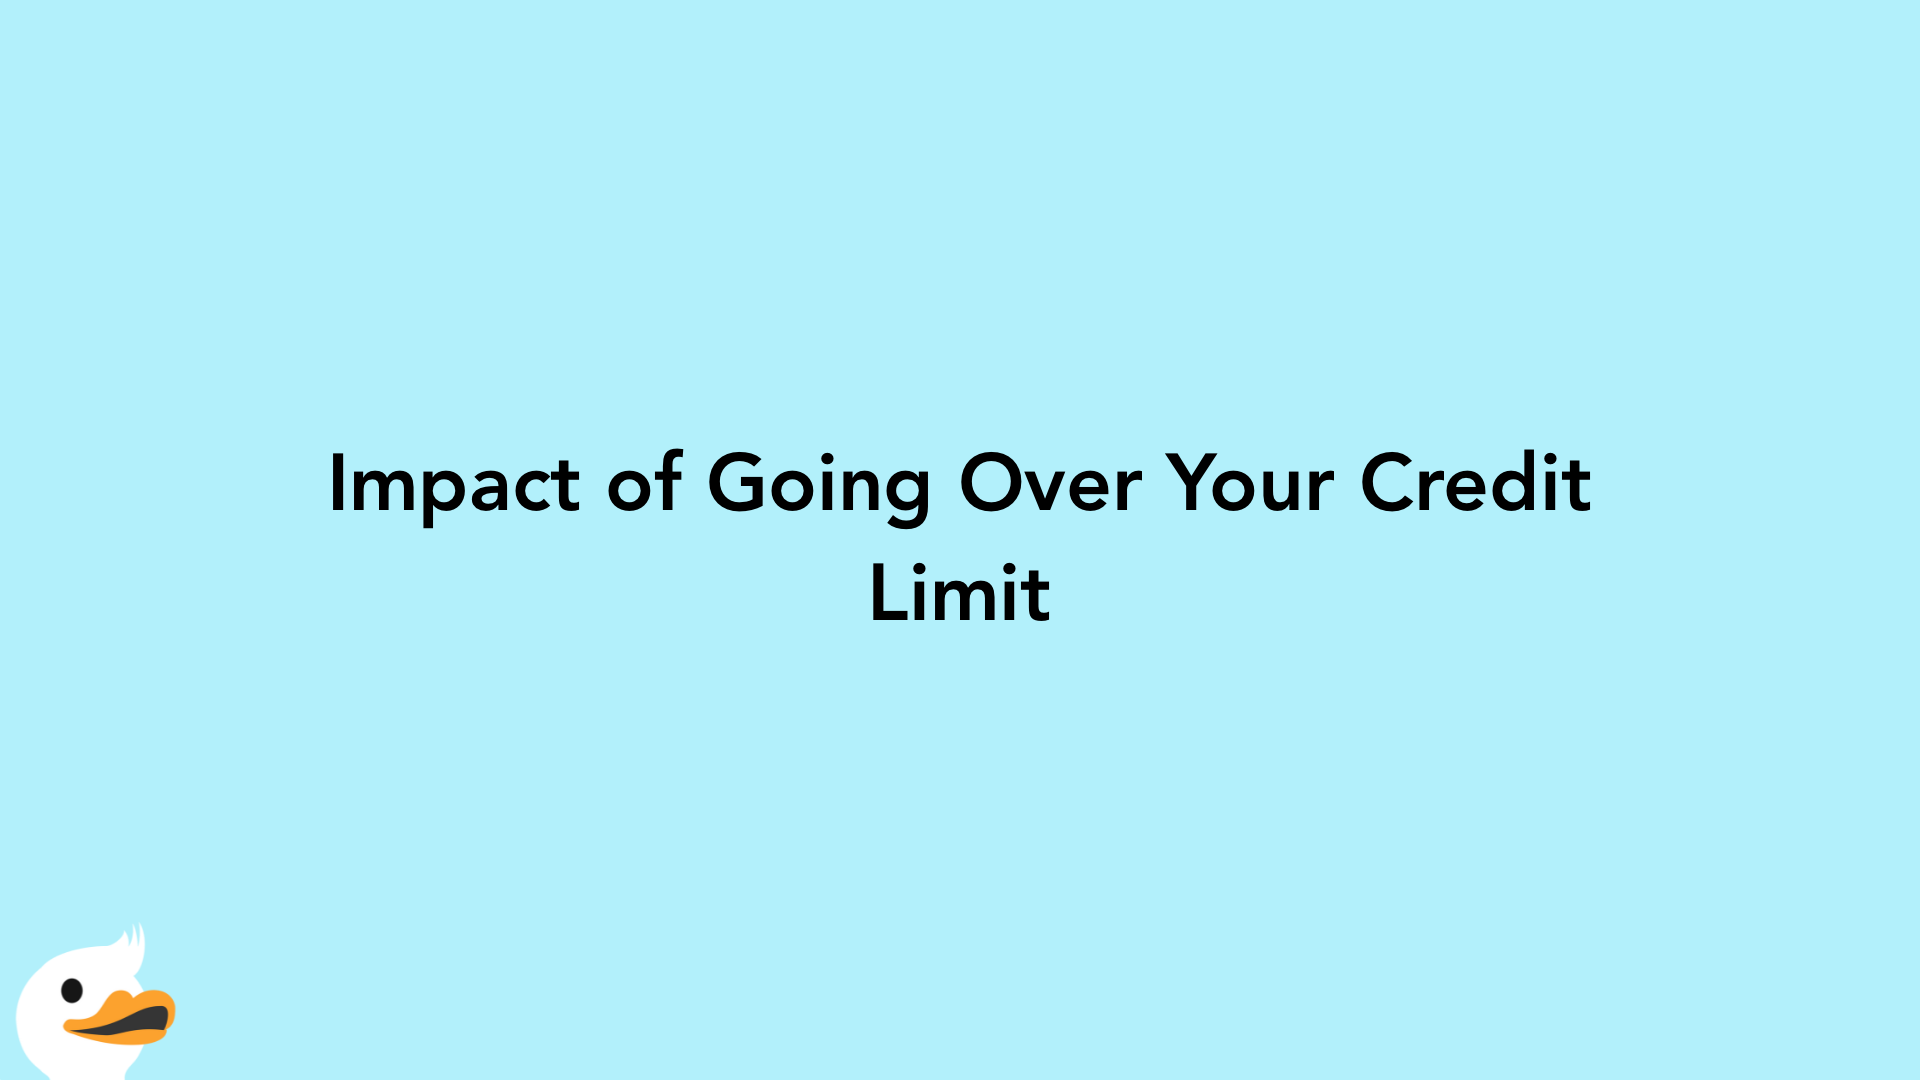 Impact of Going Over Your Credit Limit